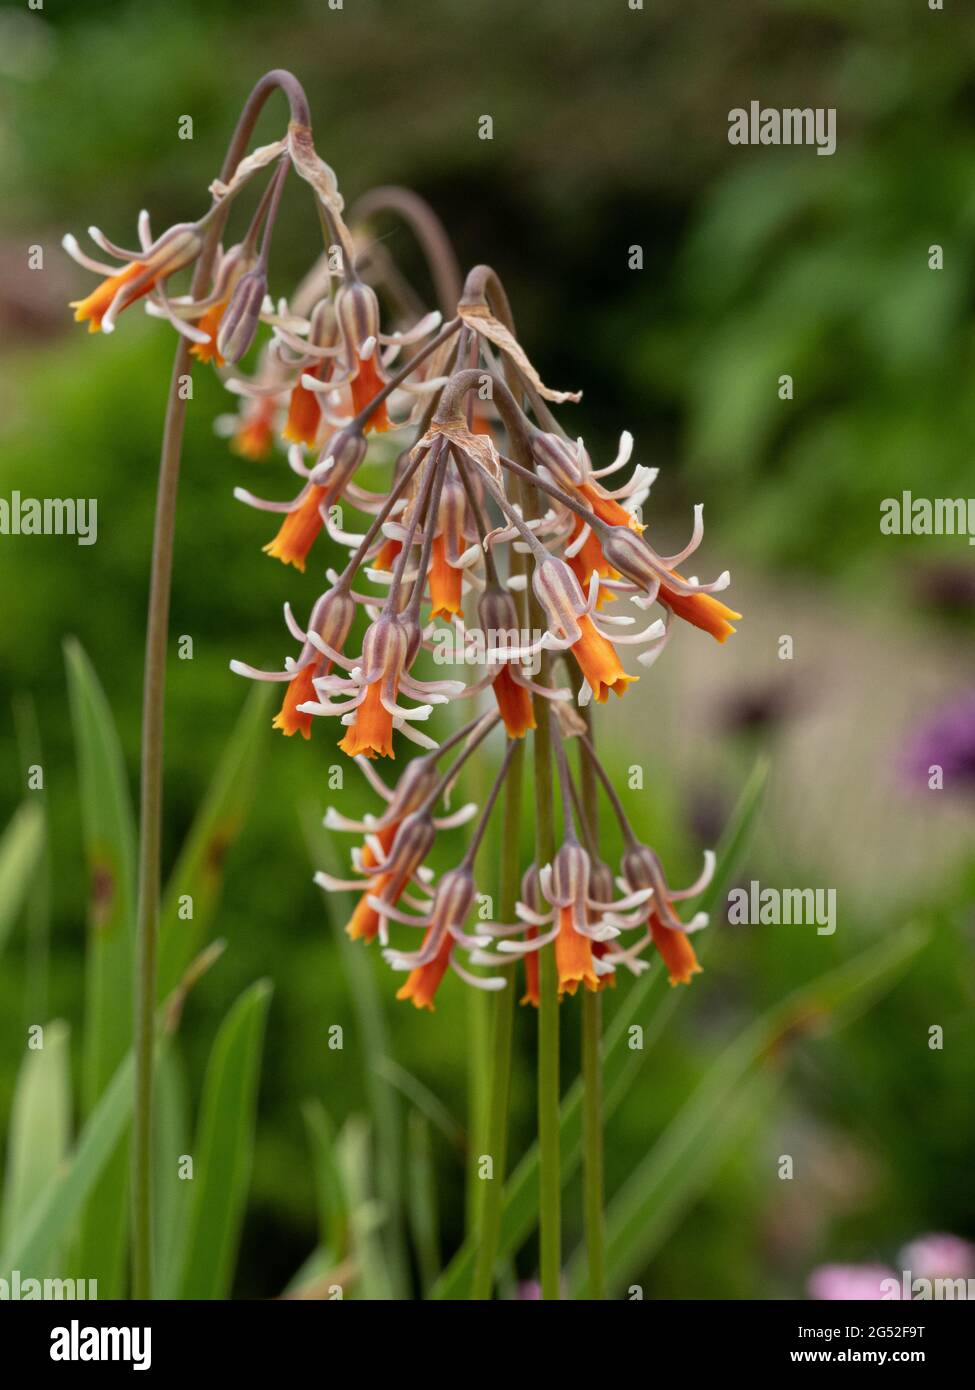 A close up of a group of the orange and white flowers of Tulbaghia capensis Stock Photo